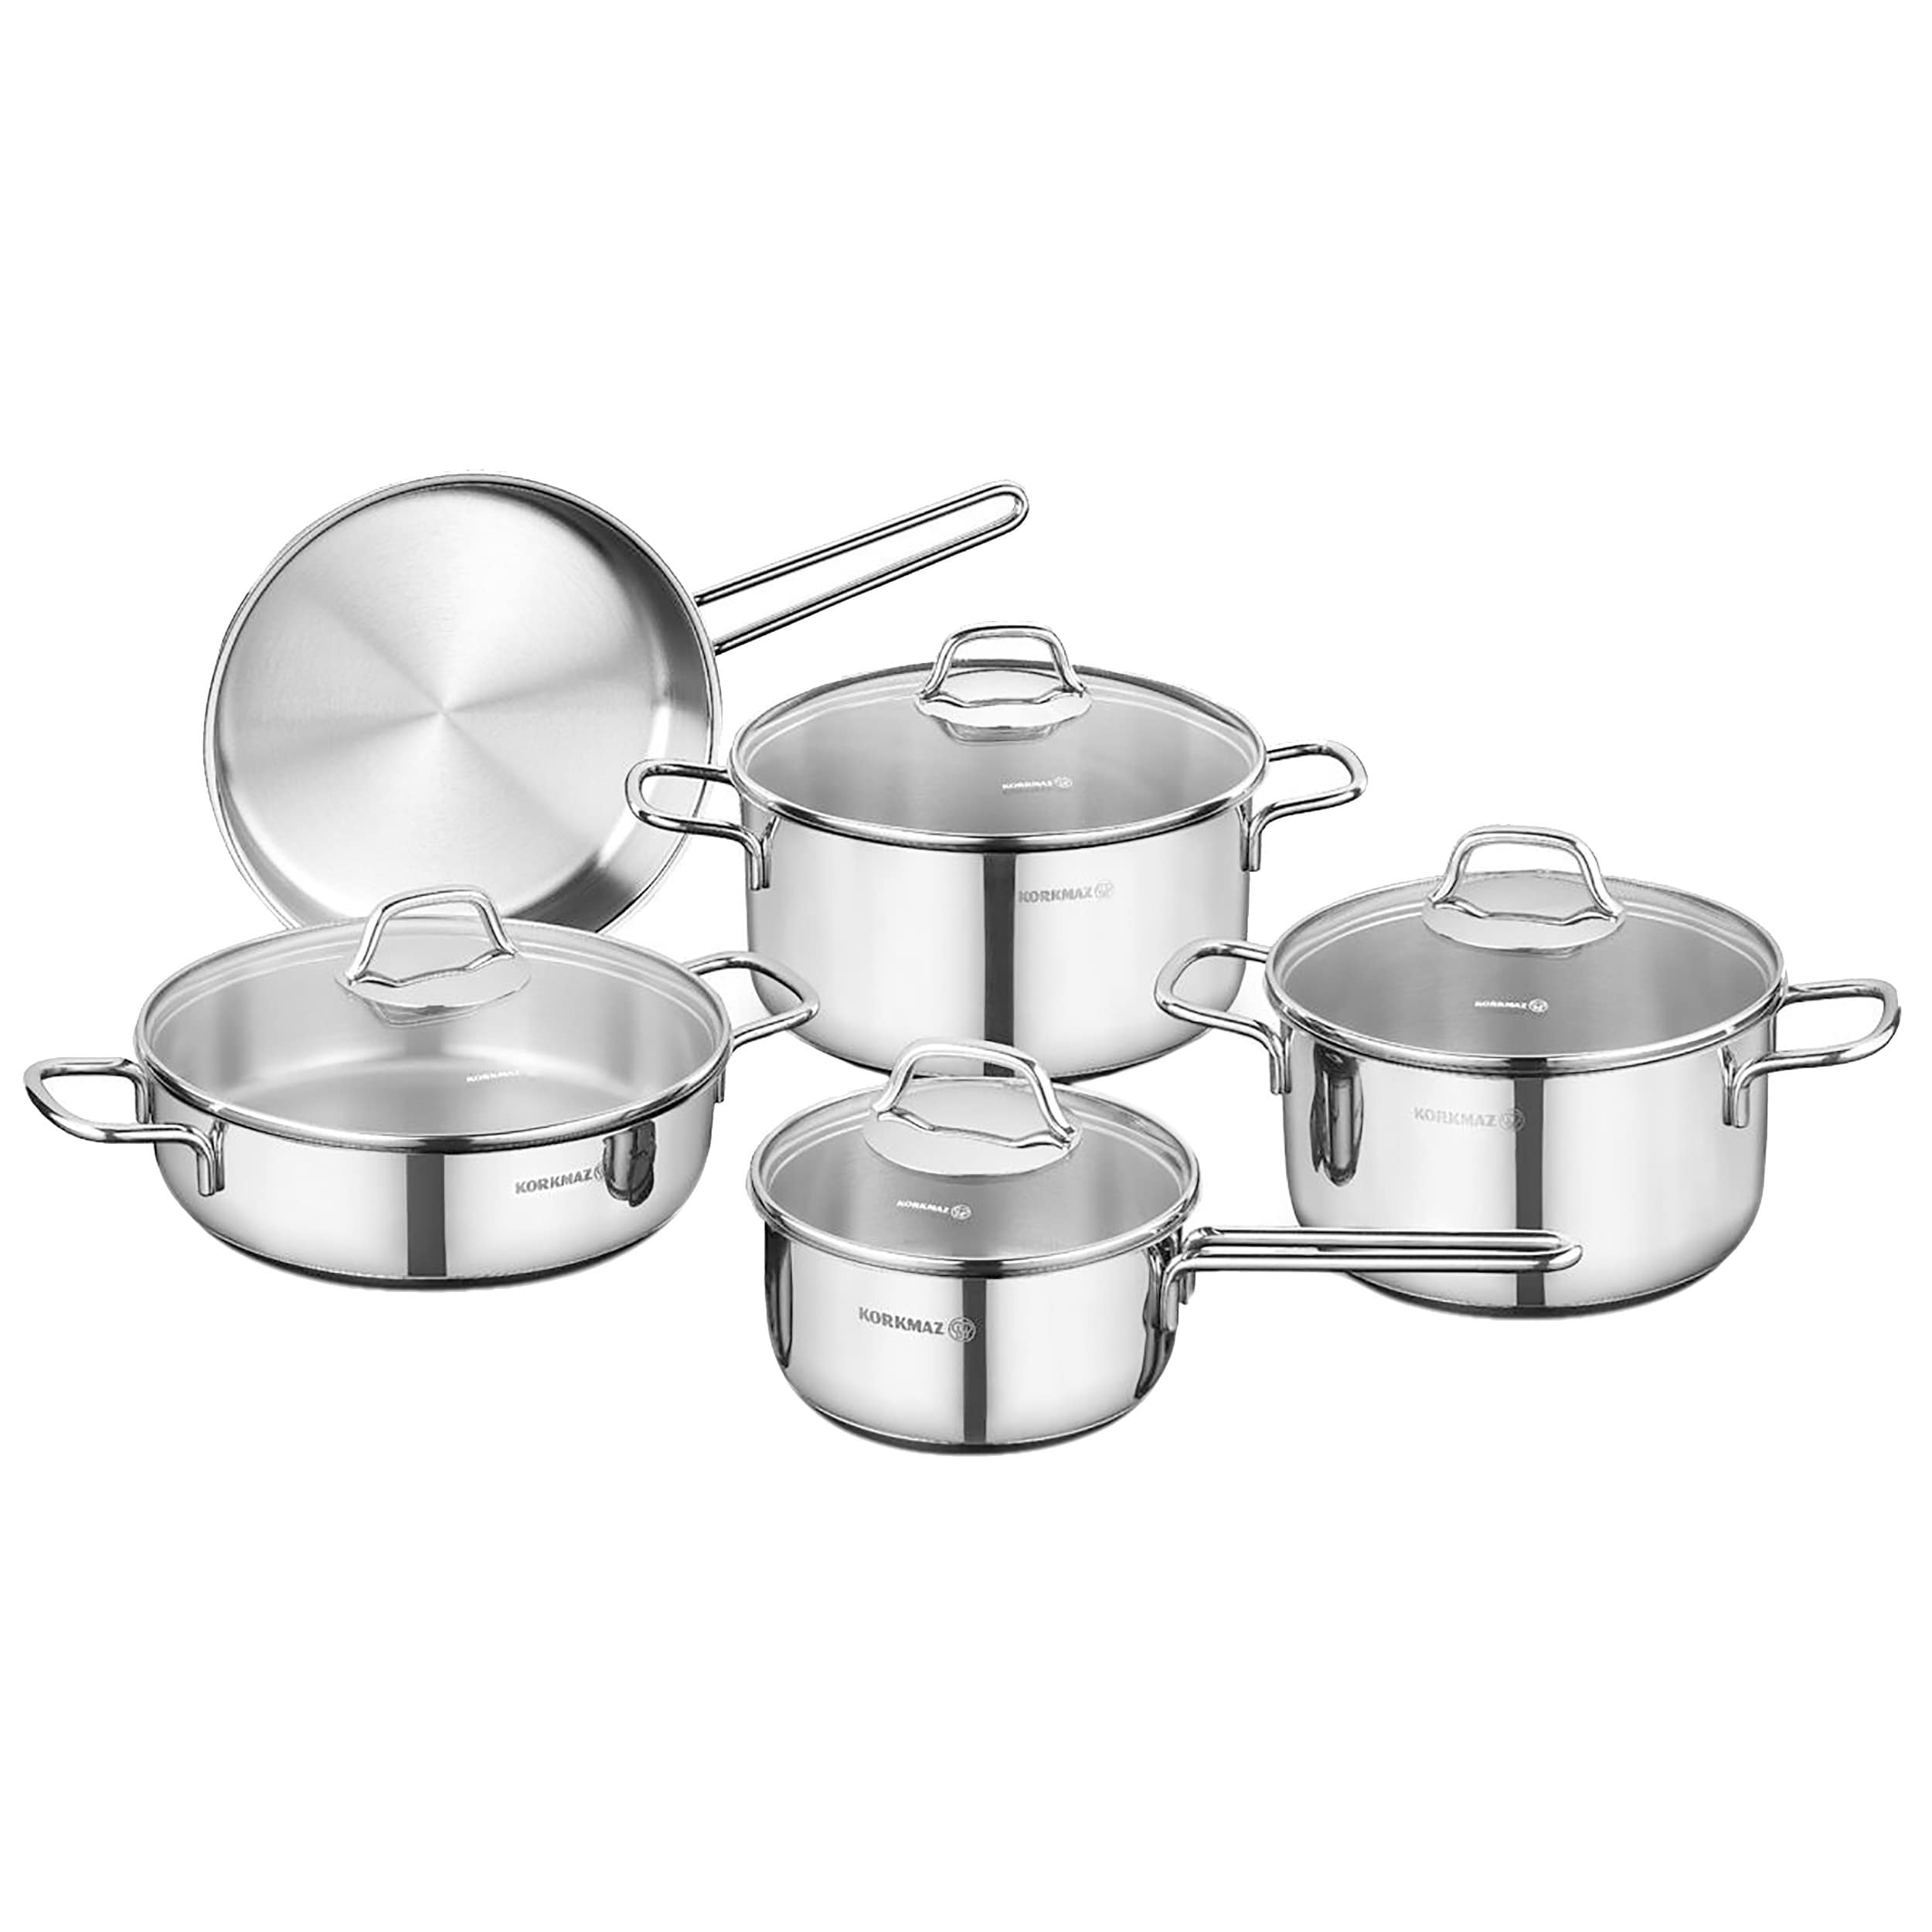 https://ak1.ostkcdn.com/images/products/is/images/direct/640bd44a5290fa5c8c4087ddc41486f34d449bda/9-Piece-Stainless-Steel-Cookware-Set-in-Silver.jpg